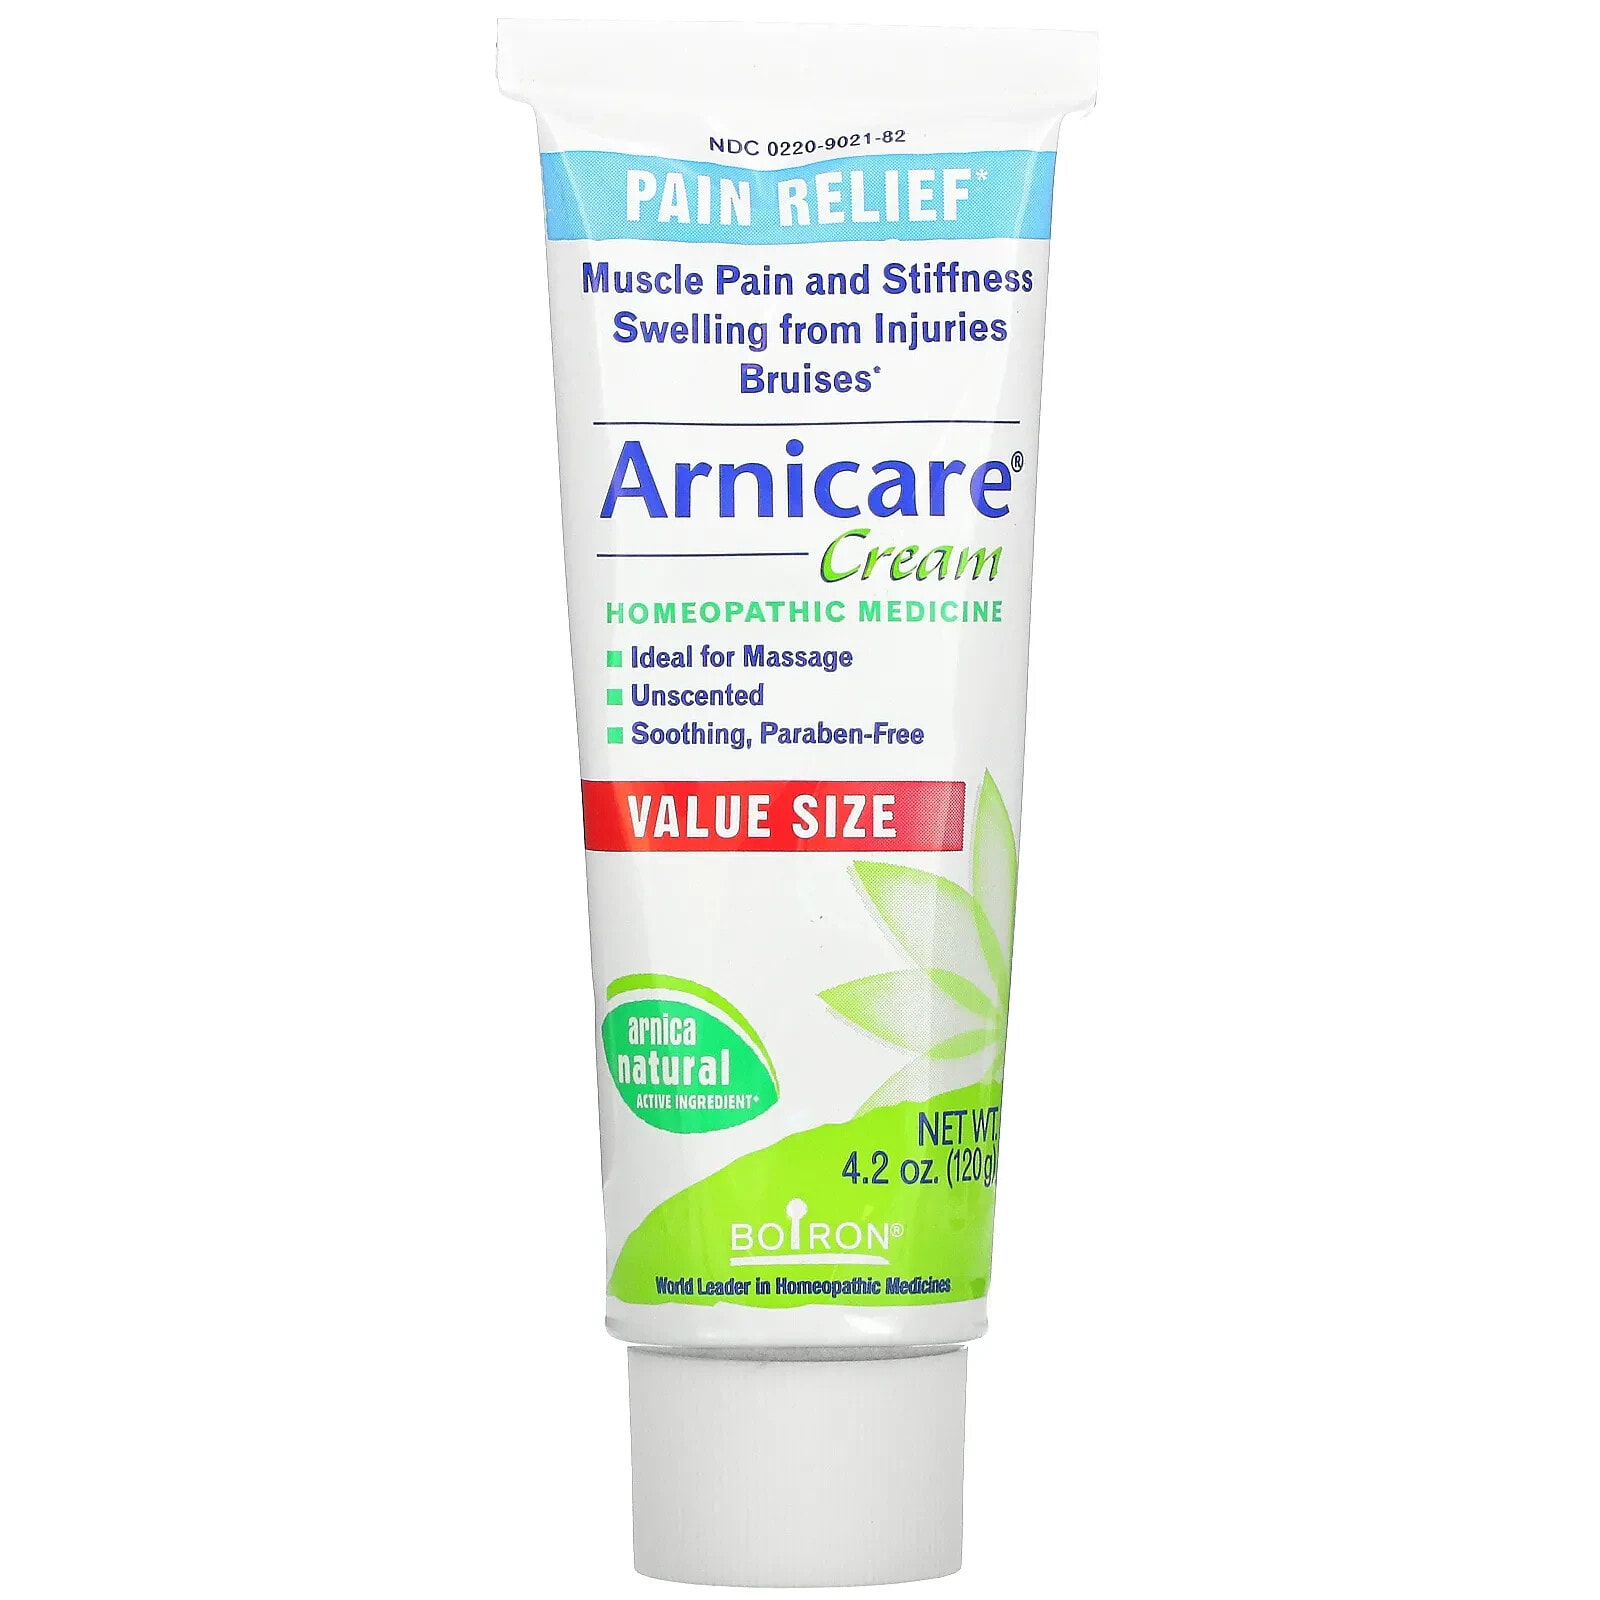 Arnicare Cream, Pain Relief, Fragrance-Free, 4.2 oz (120 g)